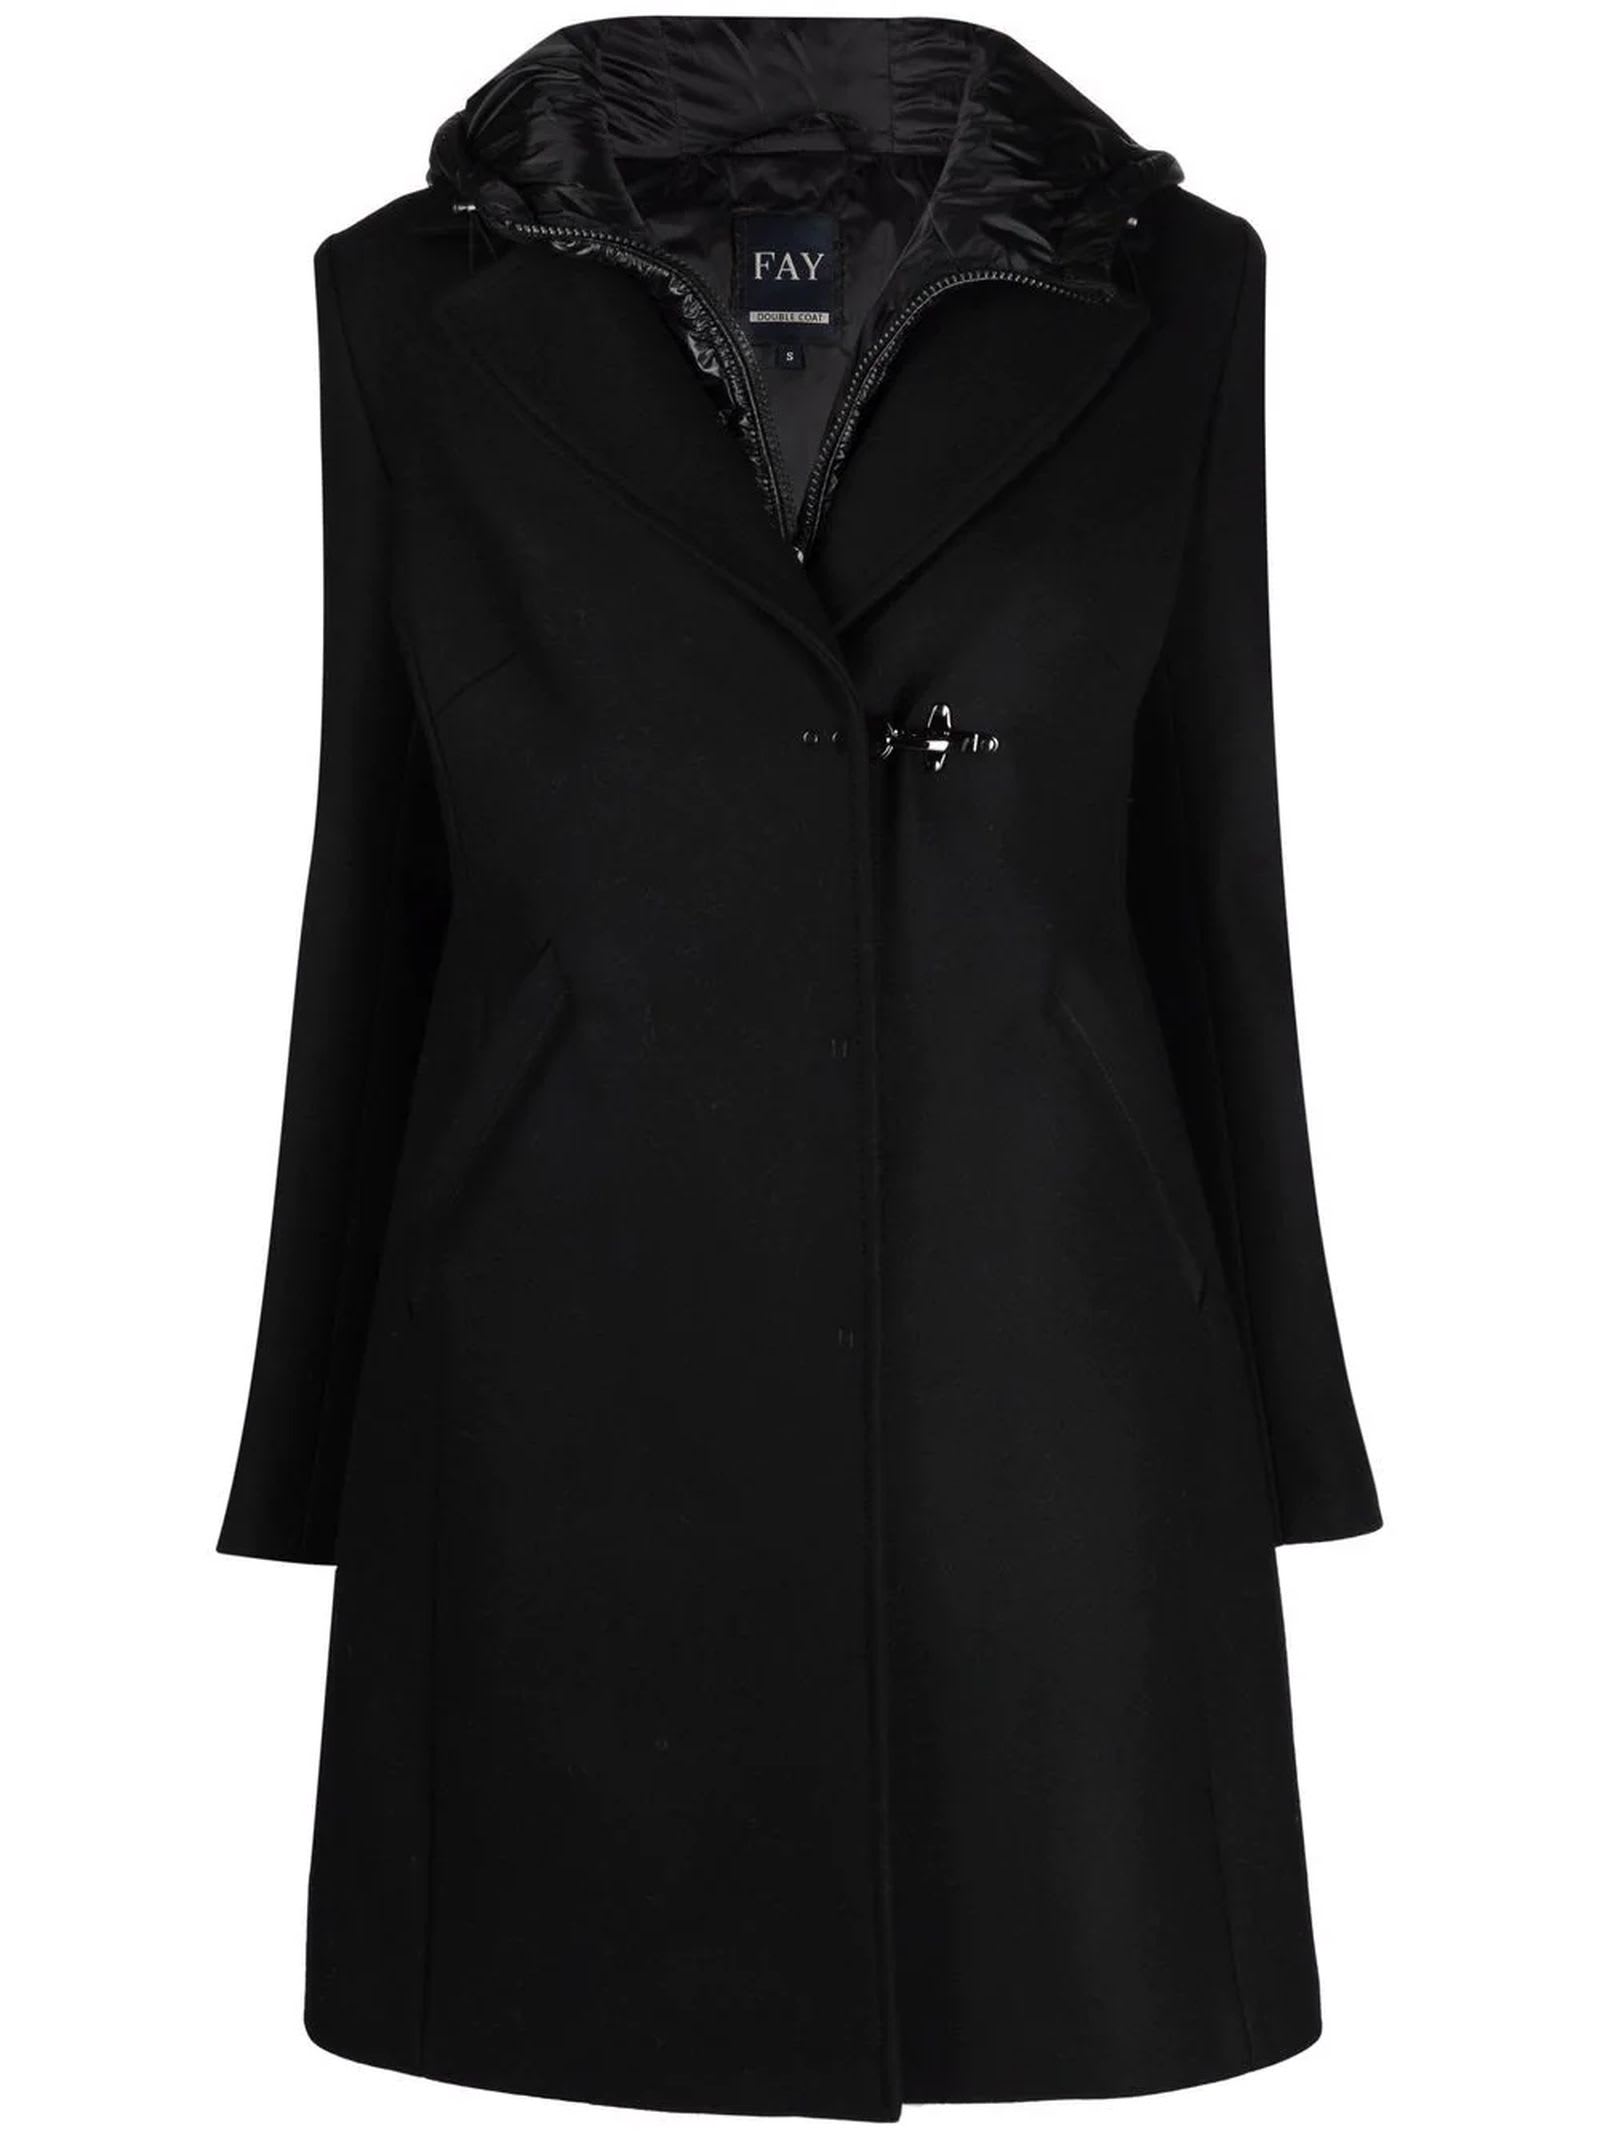 Fay Double Coat In Black Wool-blend Fabric